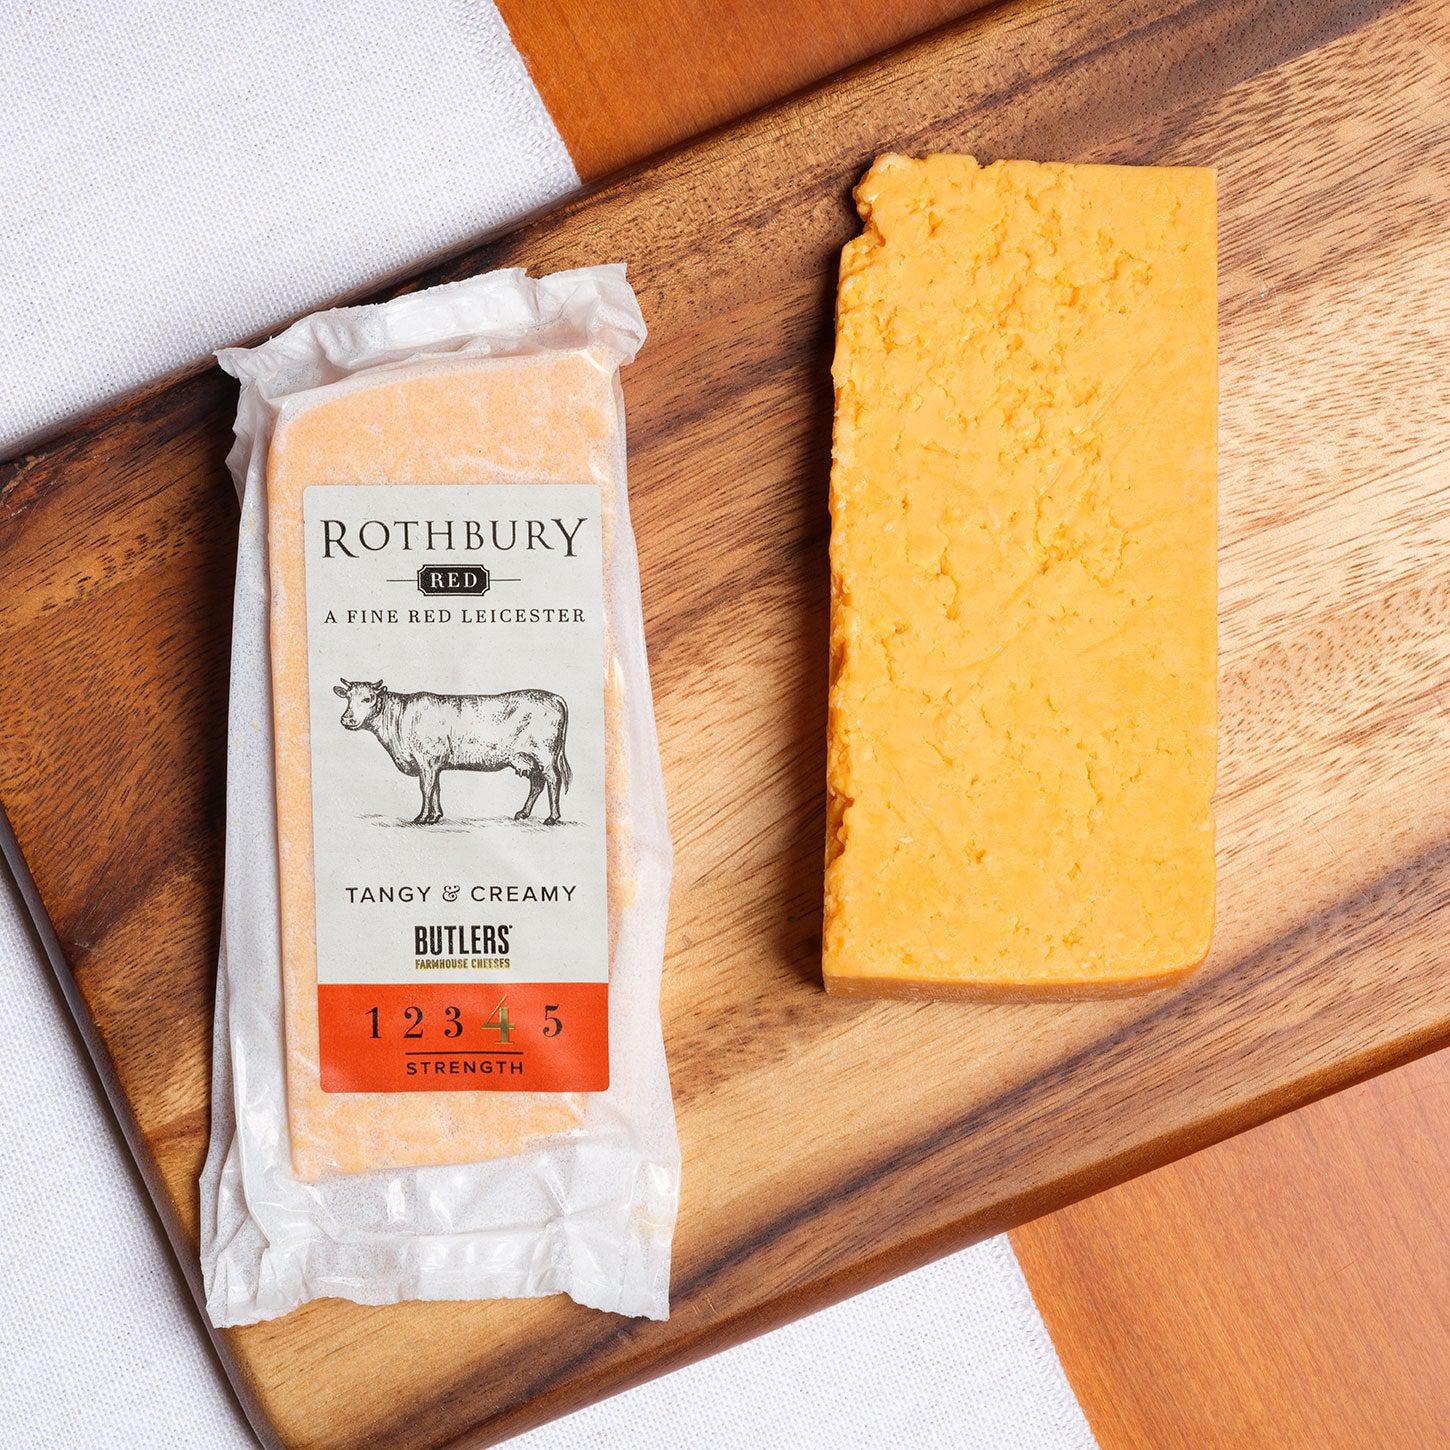 Rothbury Red is an authentic Red Leicester cheese, seen here in it's packaging and as a cheese wedge on a wooden board, Available from the Butler's Cheese Store.